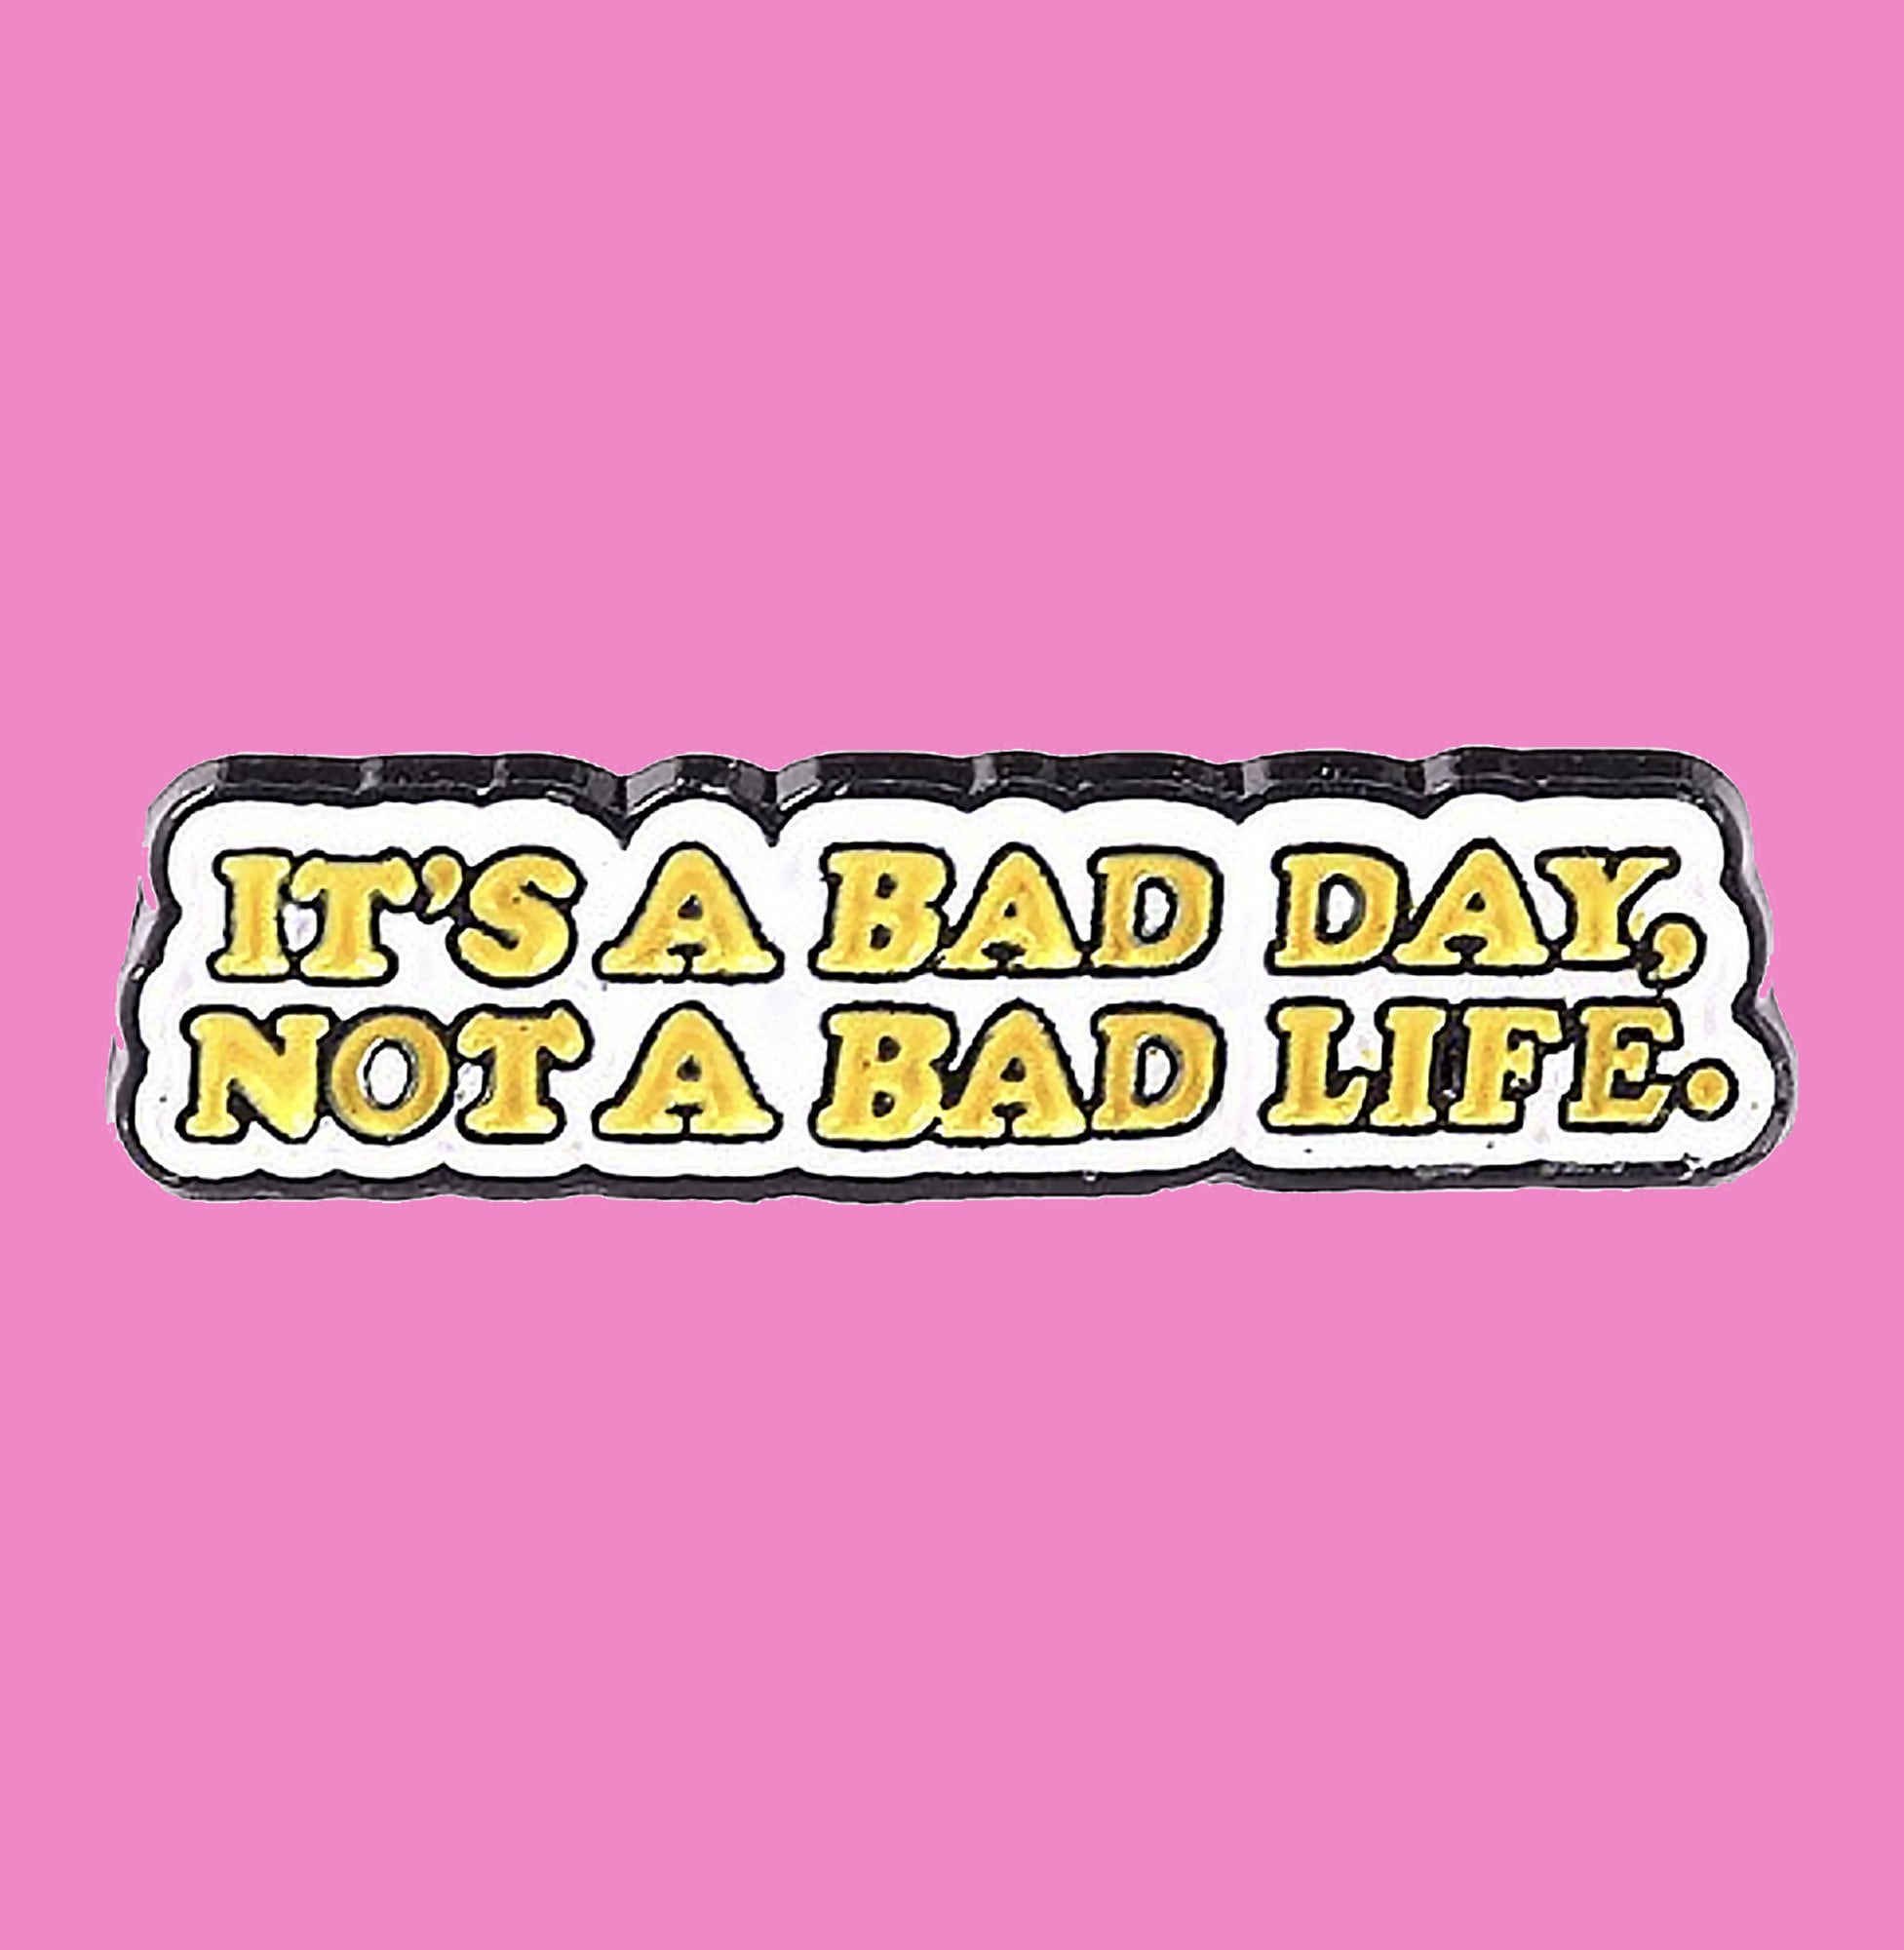 A bad day. Not a bad life! - equALLity